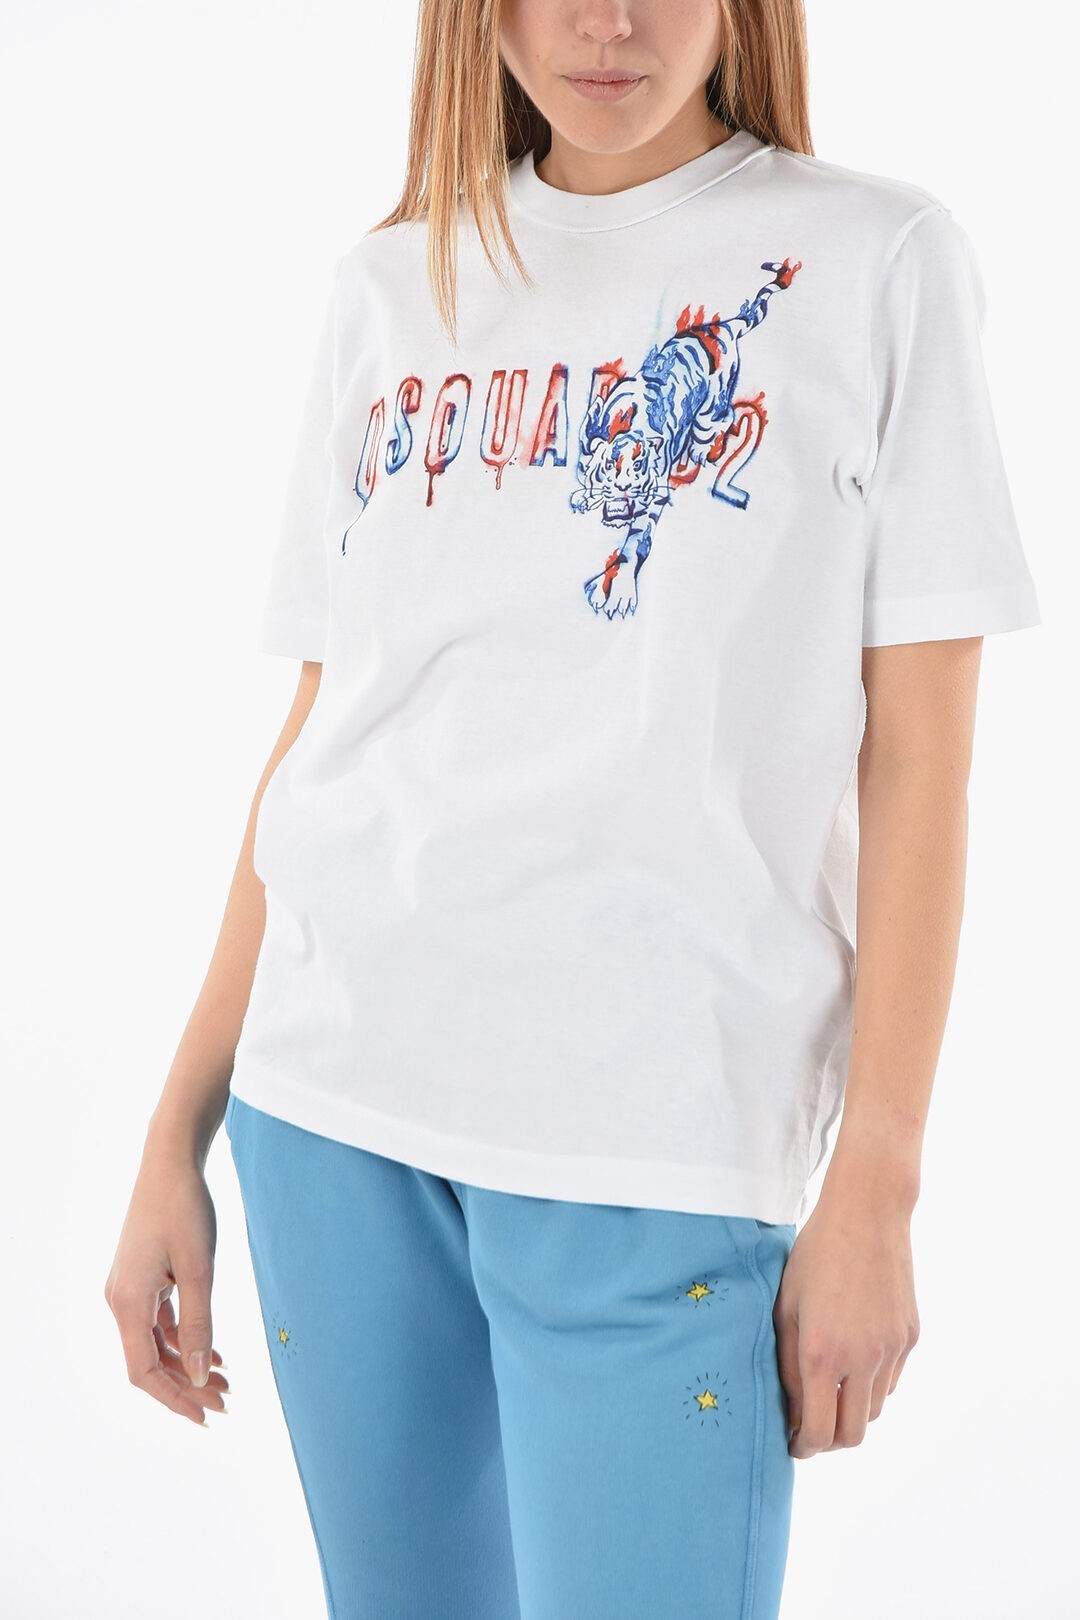 DSQUARED2 ディースクエアード White トップス S75GD0239 S22507 100 レディース PRINTED DOODLE LOGO TWISTED RENNY FIT T-SHIRT  dk